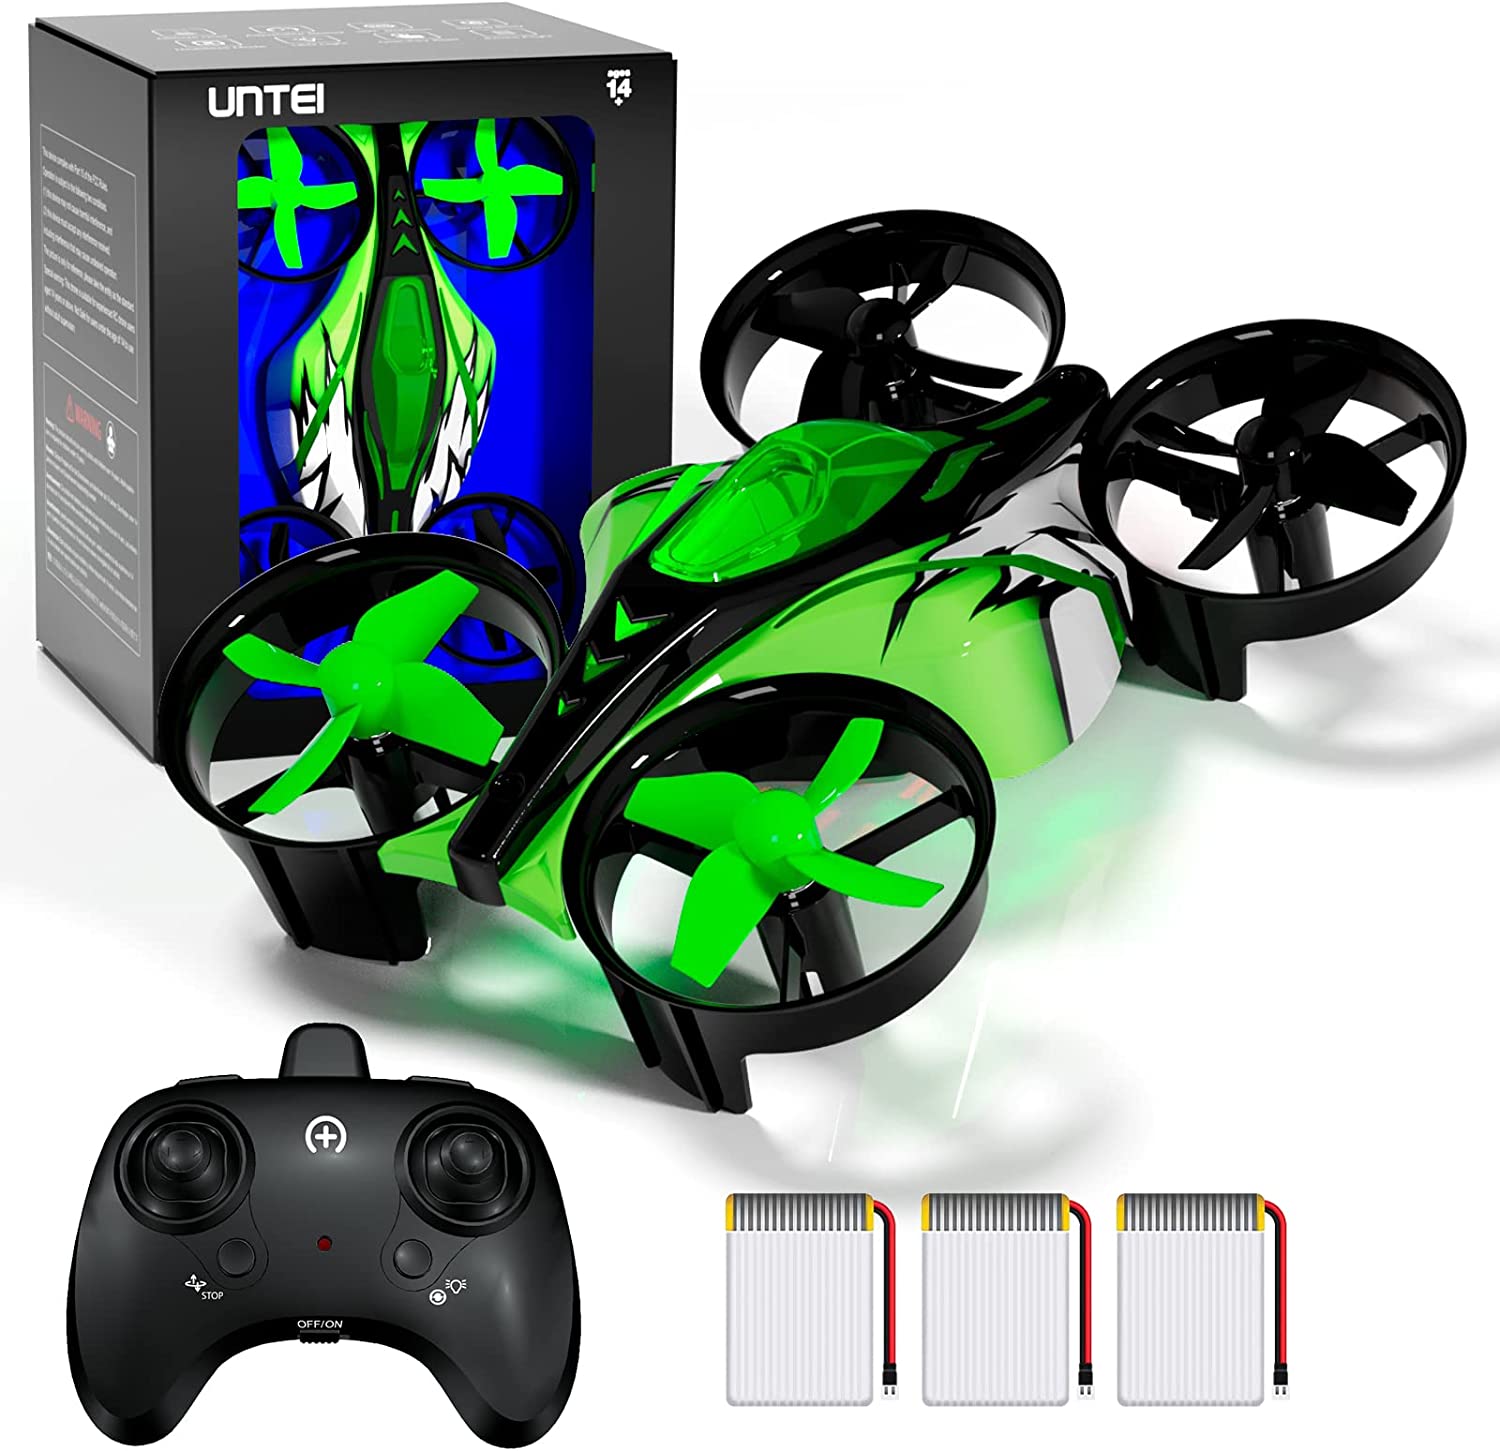 UNTEI 2 In 1 Mini Drone for Kids Remote Control Drones with Land Mode or Fly Mode